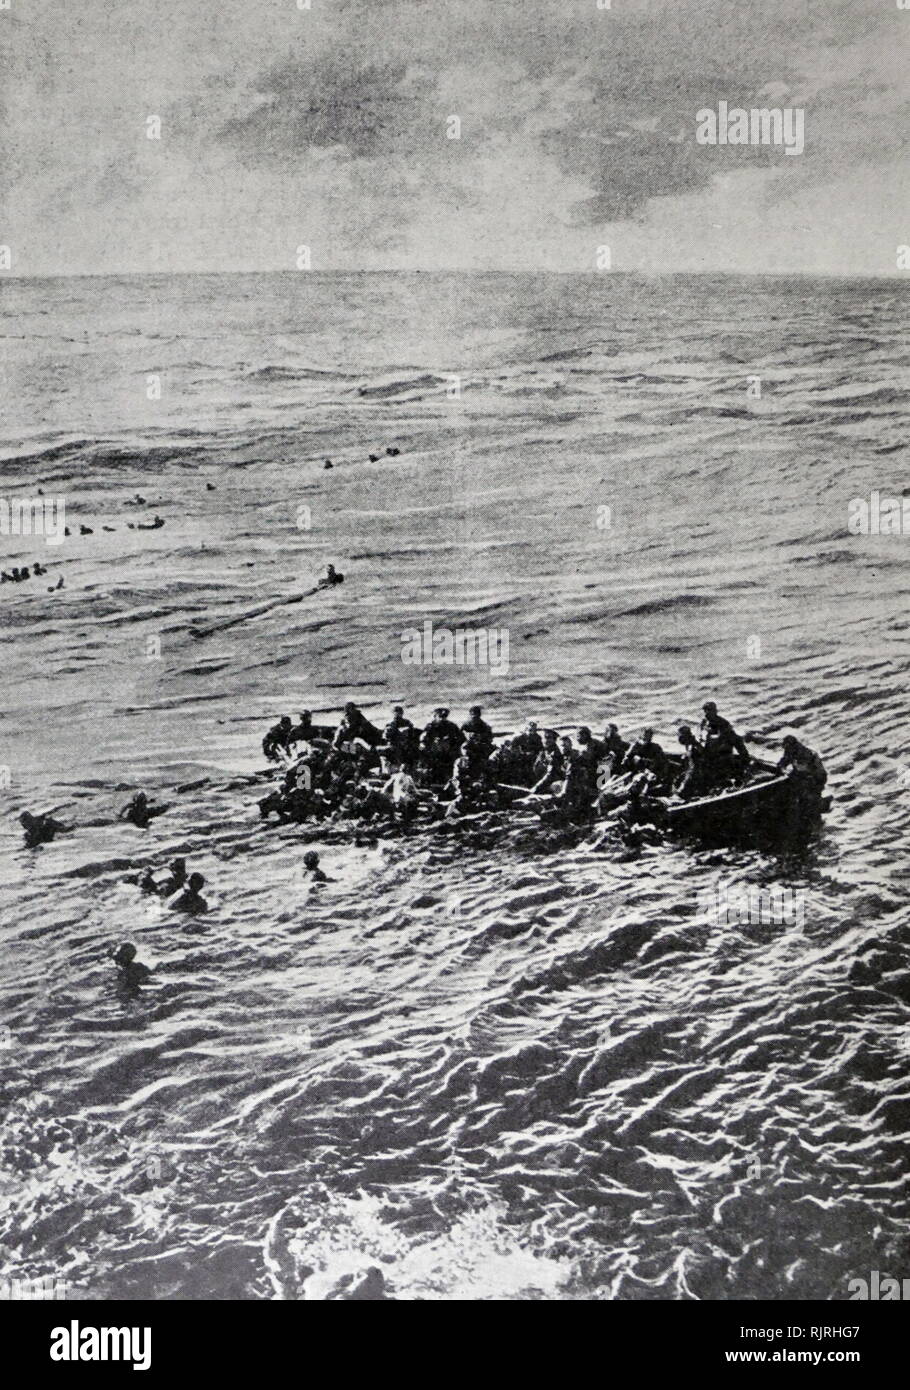 The Ivernia was a Cunard liner employed during World War One, on transport service. She was sunk in the Mediterranean on New Year's Day, 1917, by a German submarine. This photograph, taken from the deck of the sinking transport, shows men struggling in the water and one of the lifeboats about to founder. About one hundred and twenty soldiers were lost and thirty-three members Stock Photo